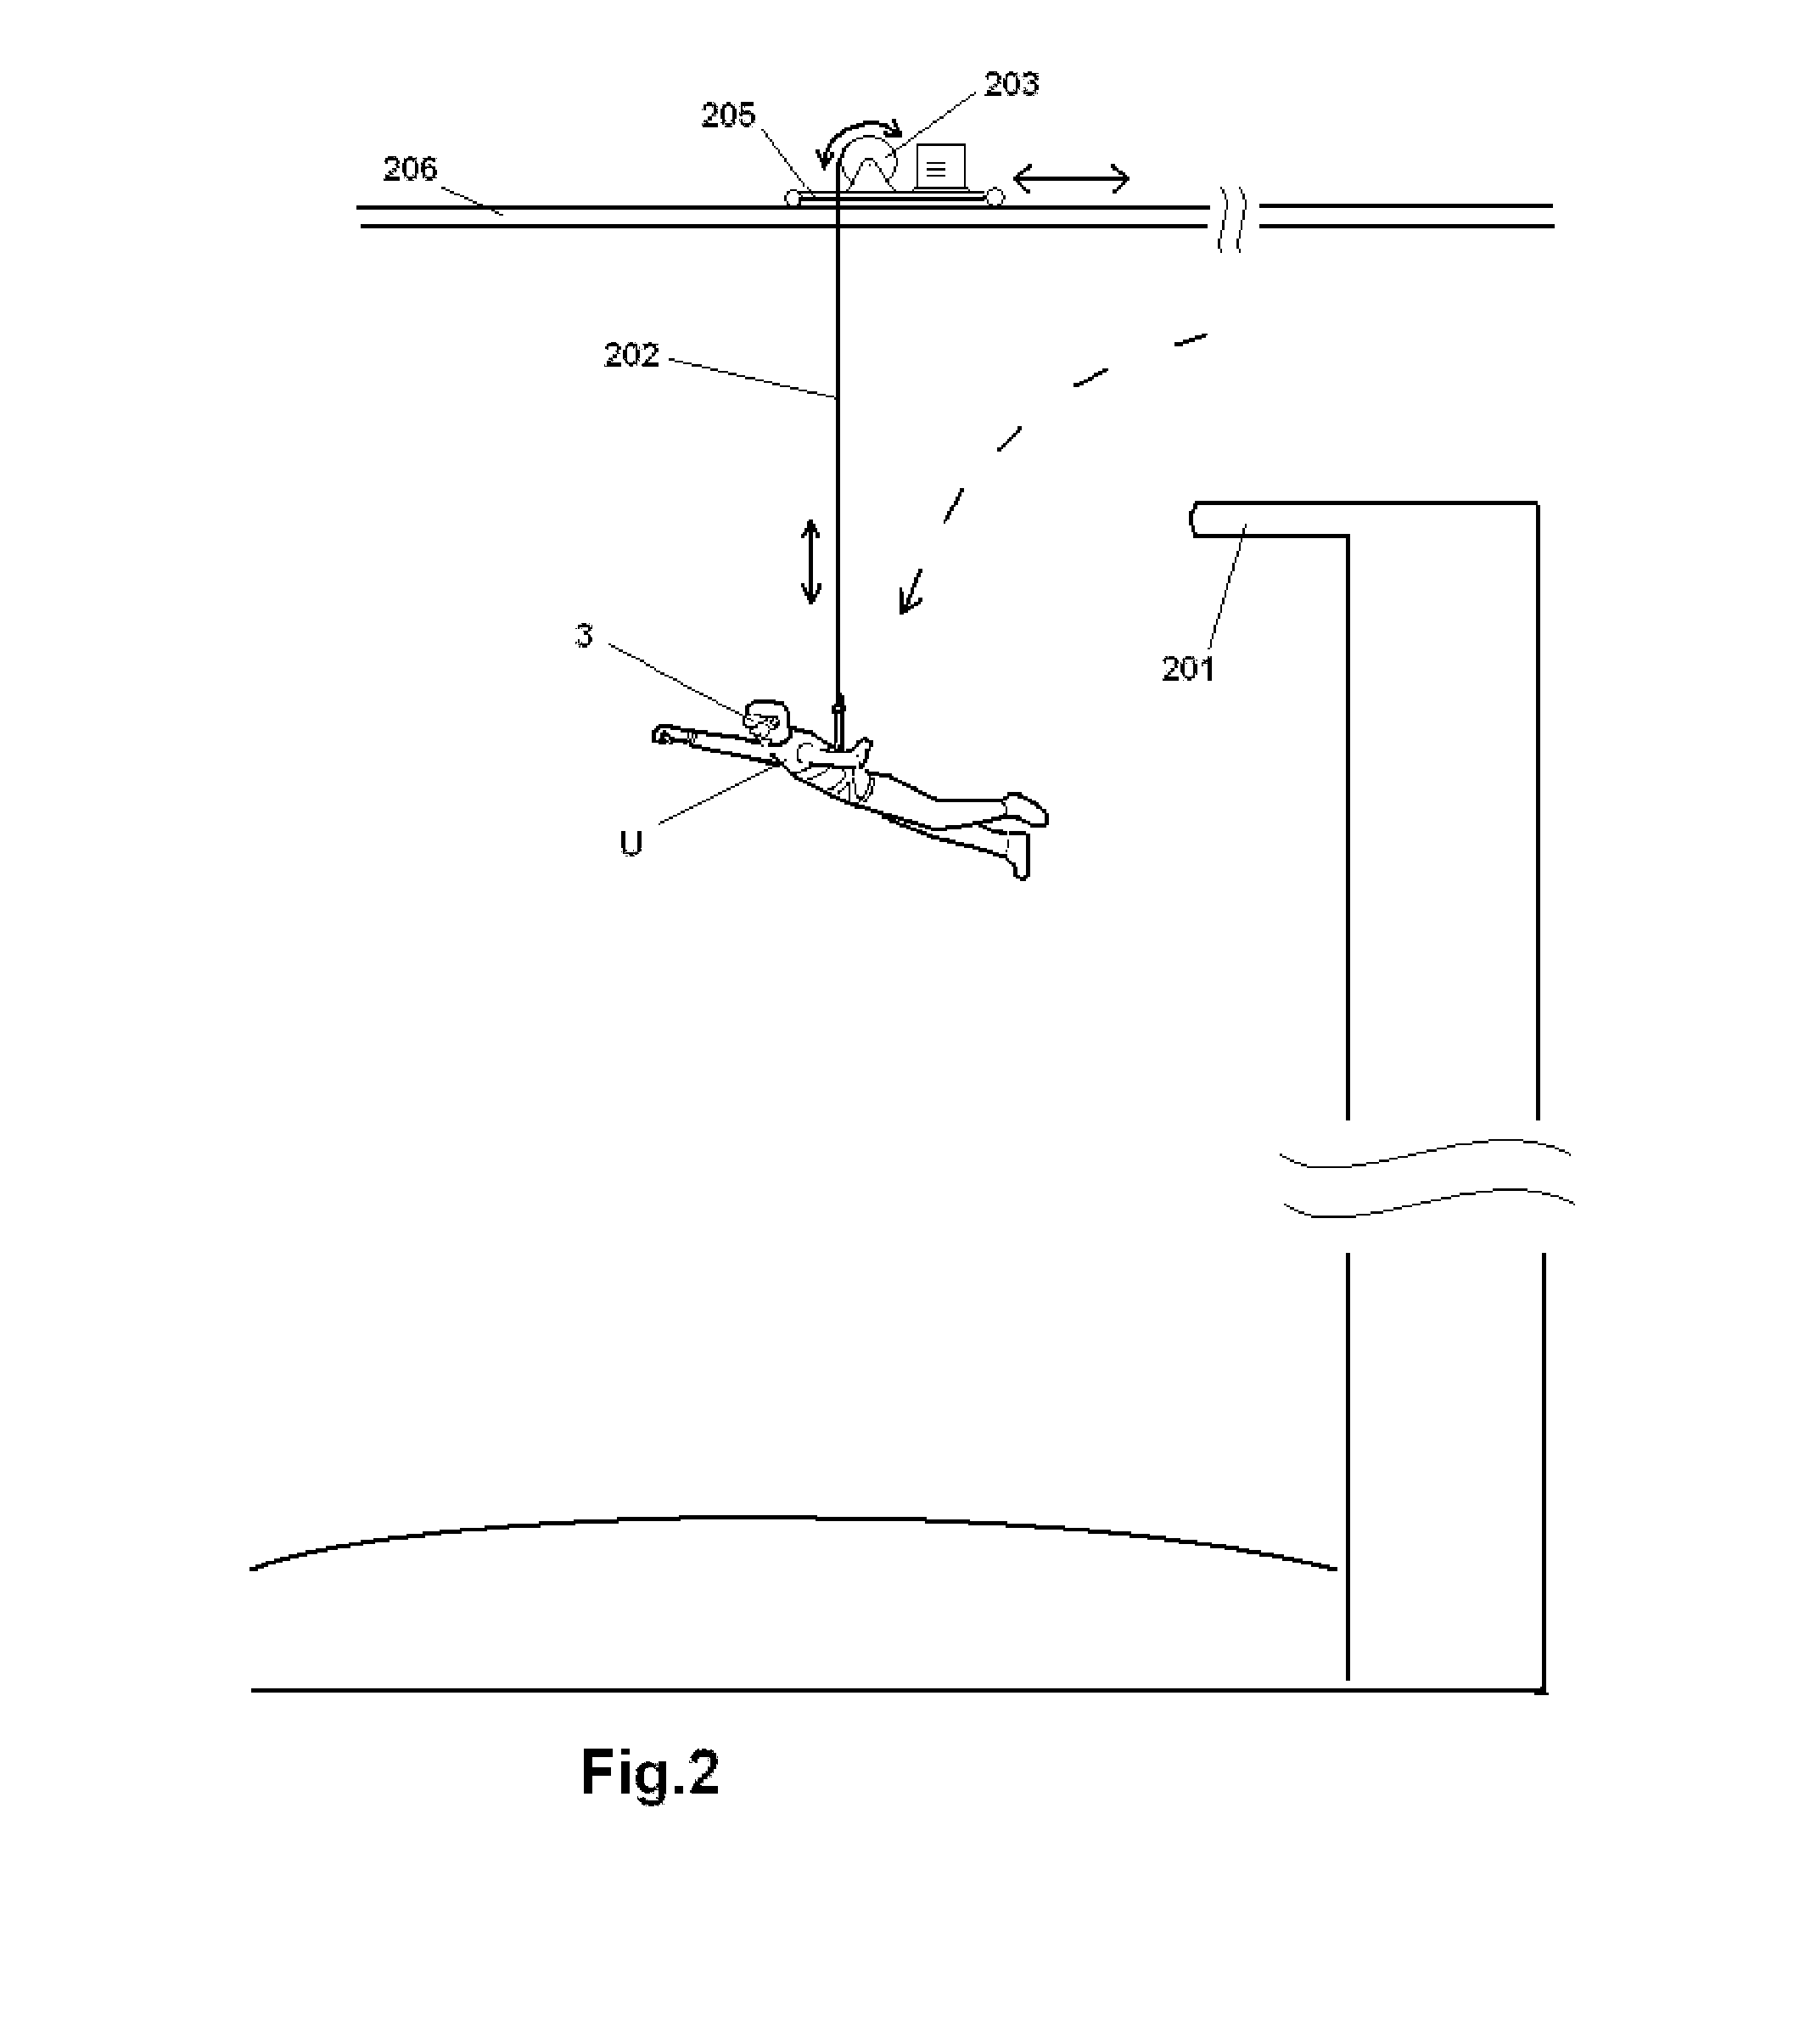 Methods and apparatus to provide user a somatosensory experience for thrill seeking jumping like activities